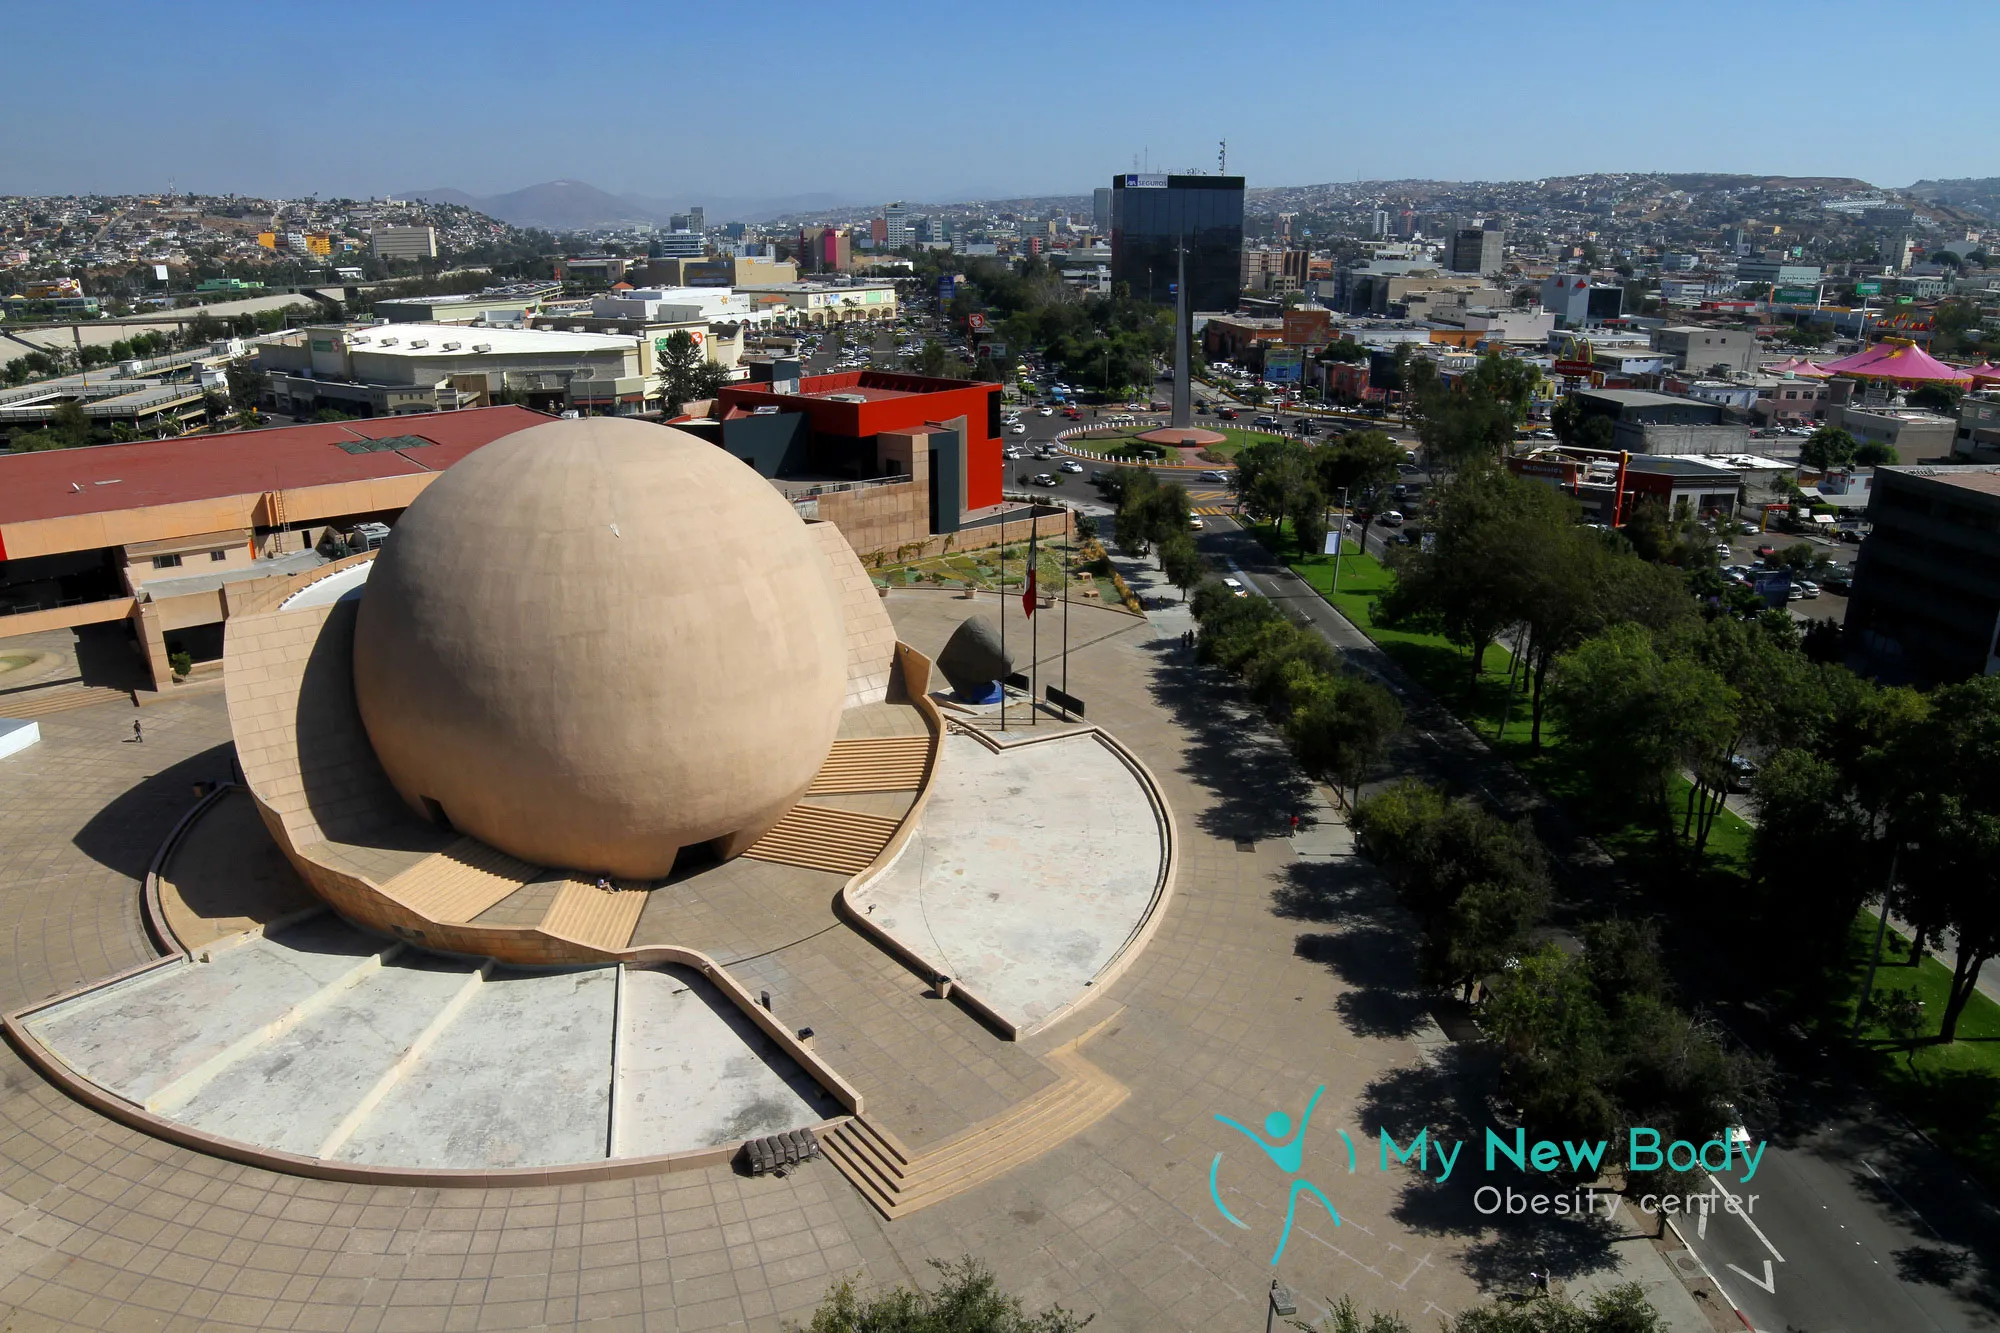 Top 7 reasons why Tijuana is the Best Place for Weight Loss Surgery